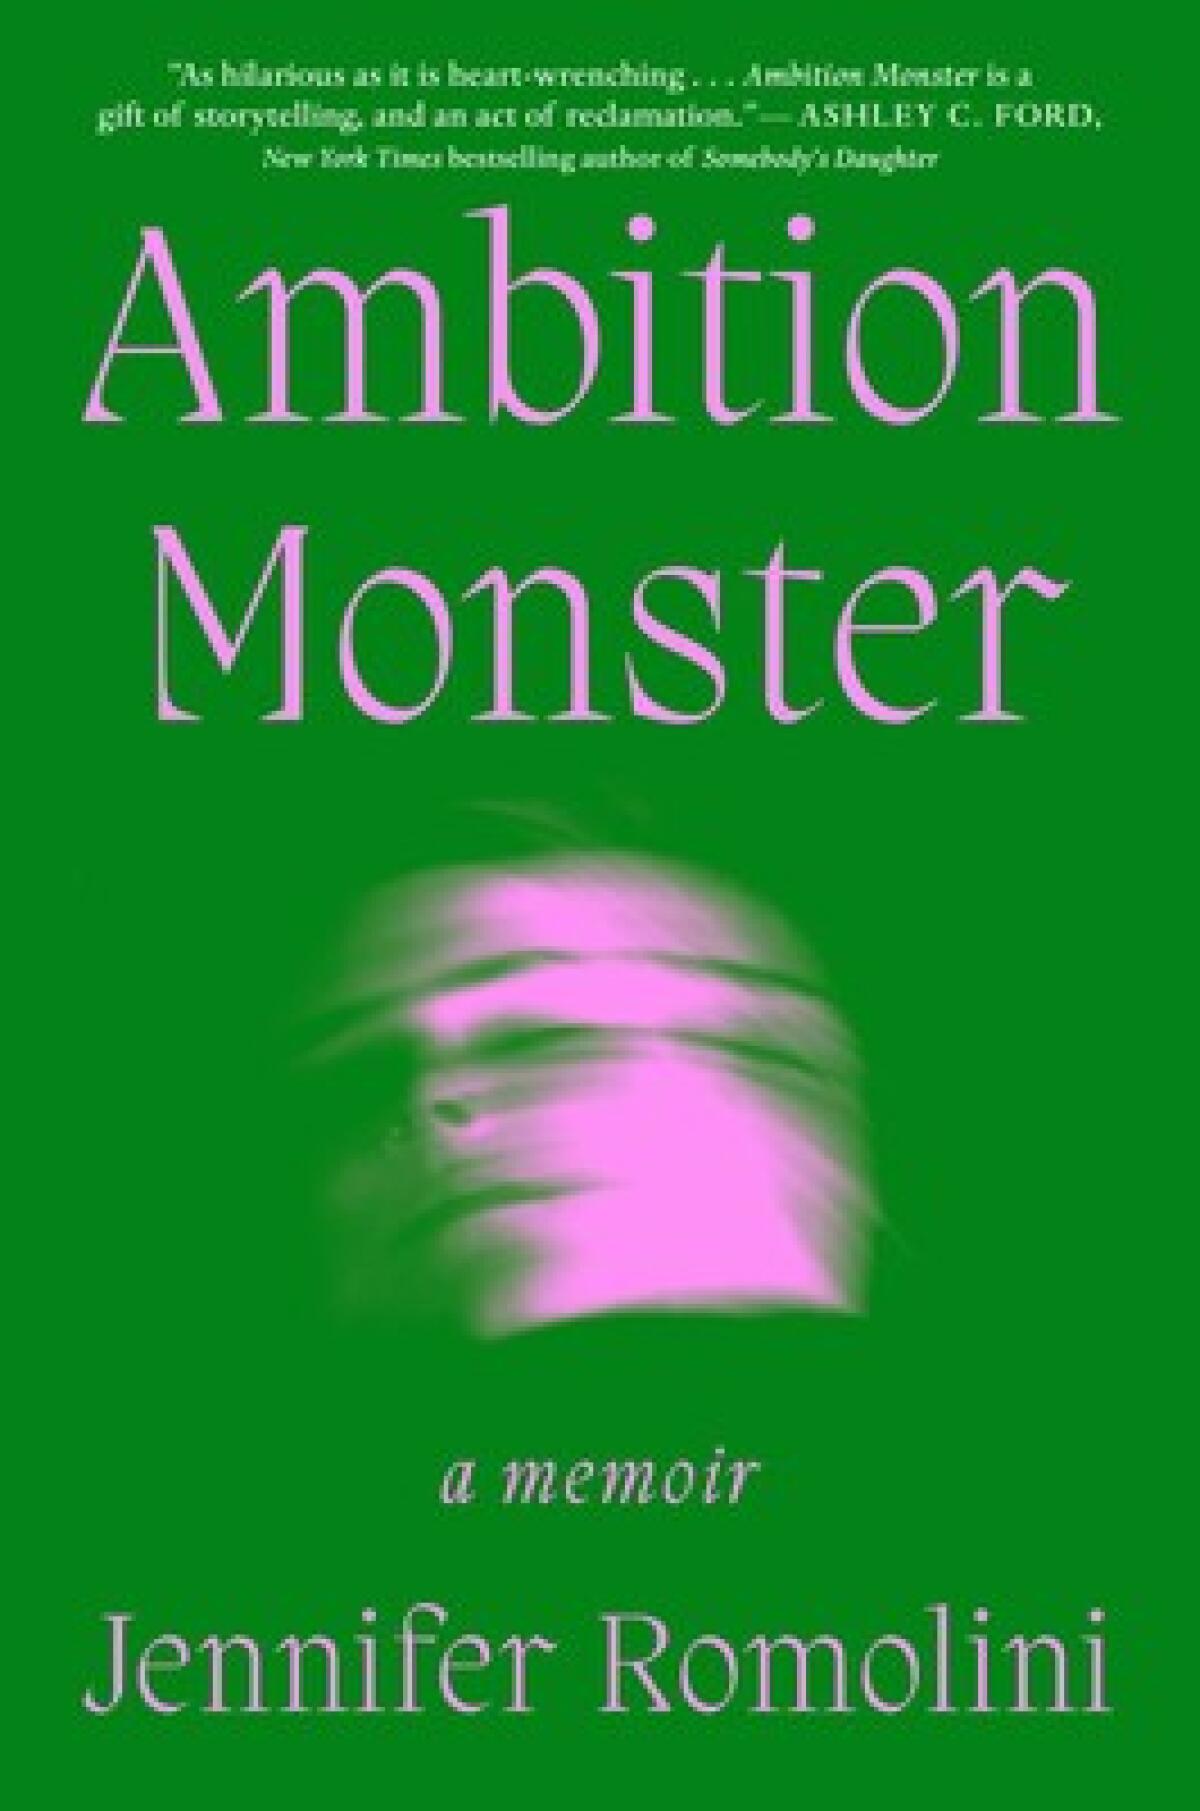 The cover of "Ambition Monster"